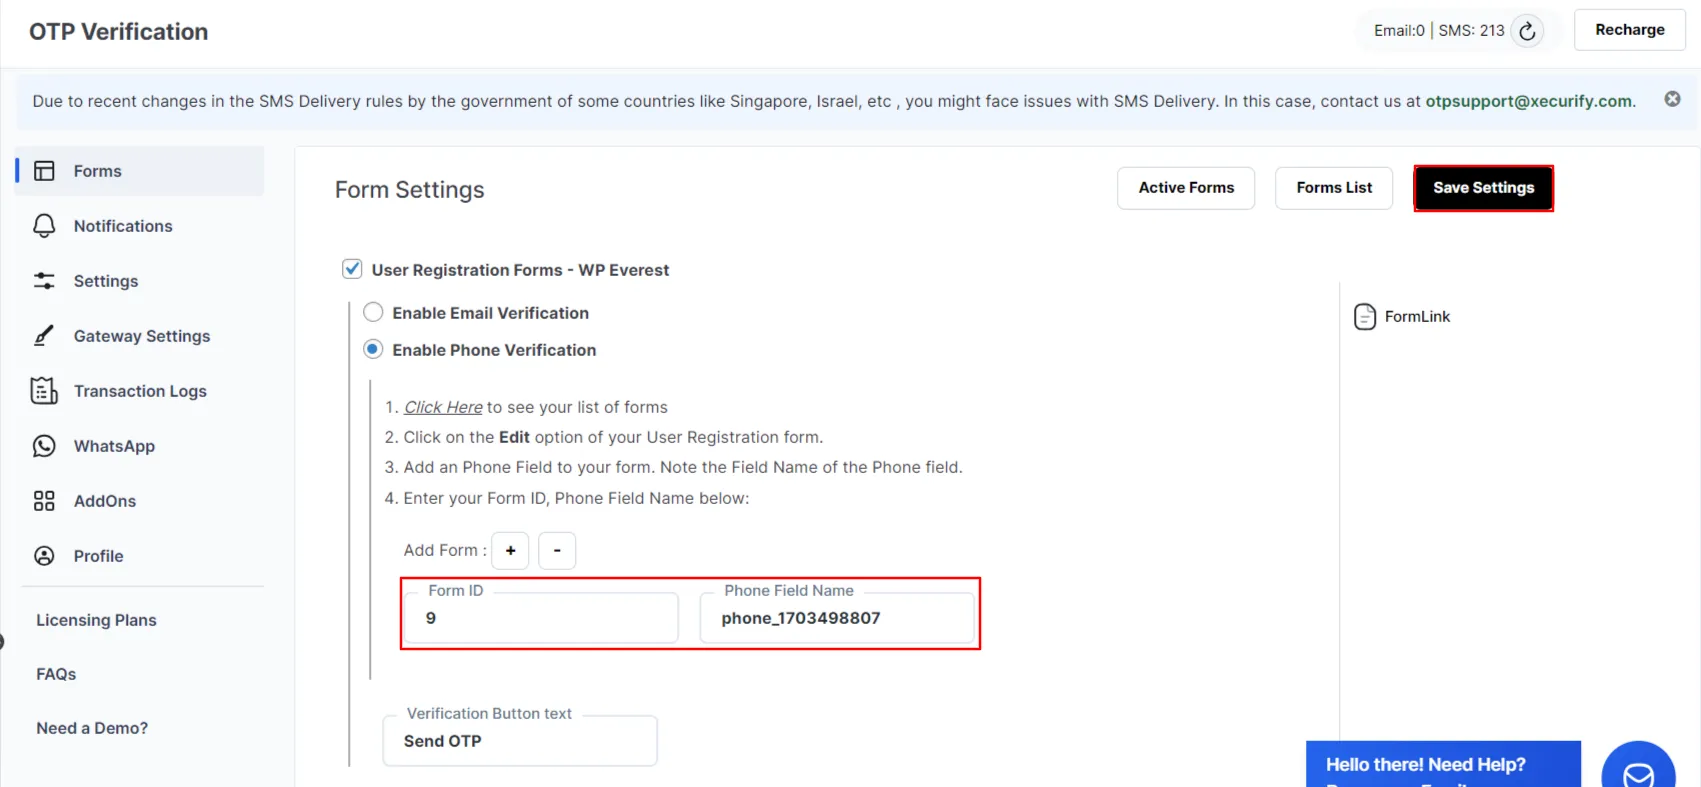 User Registration Forms - WP Everest - Click Save Settings